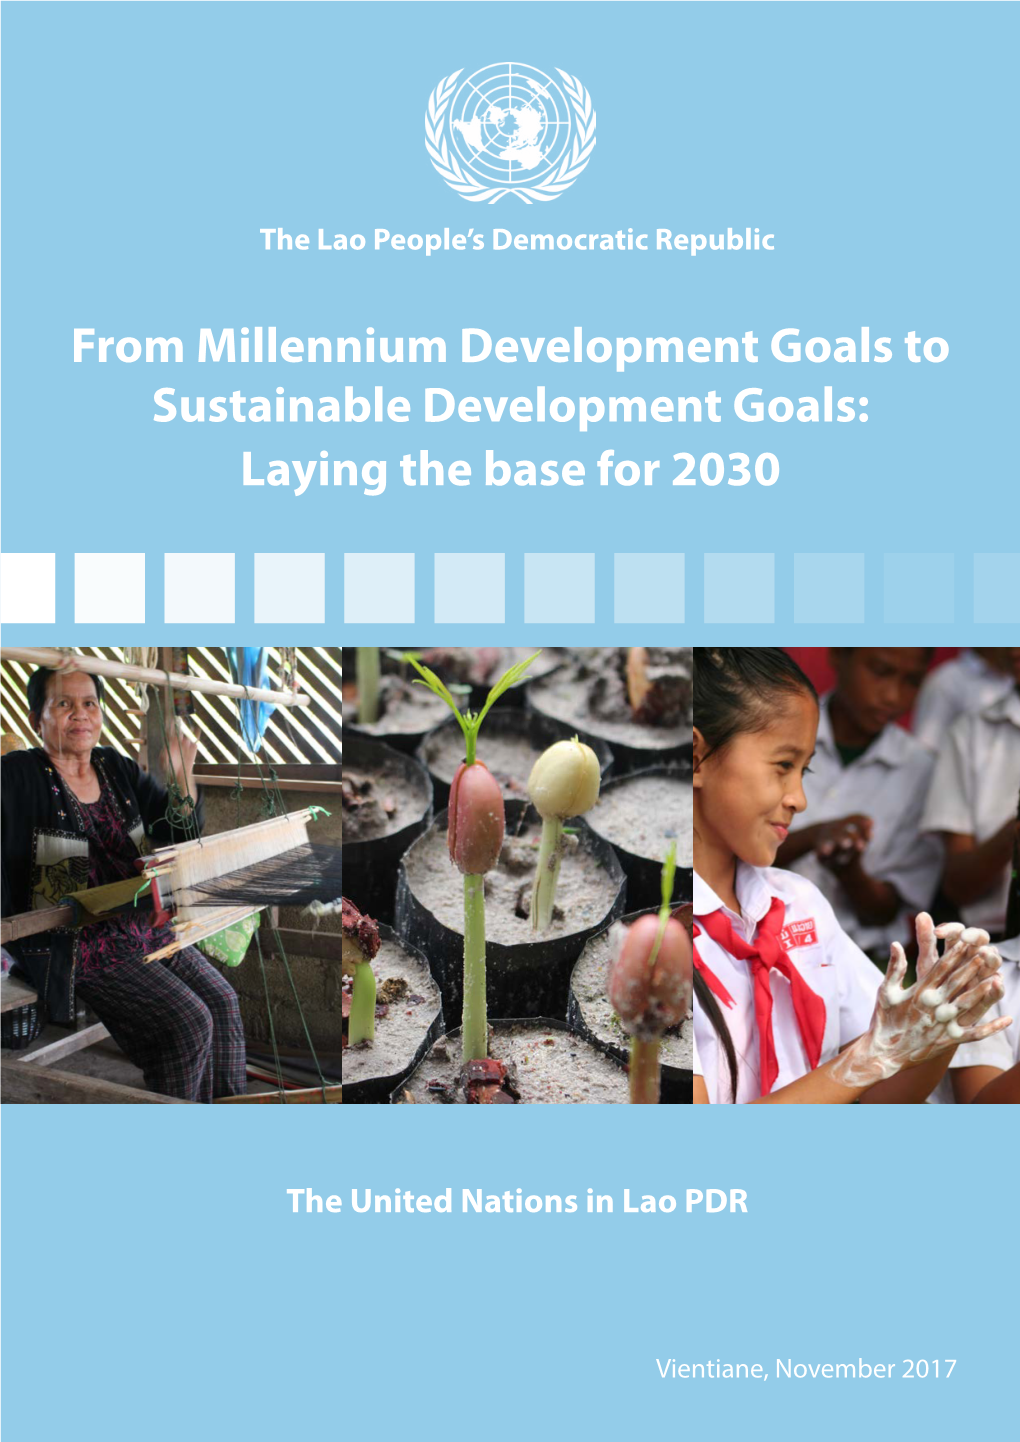 From the Millennium Development Goals to the Sustainable